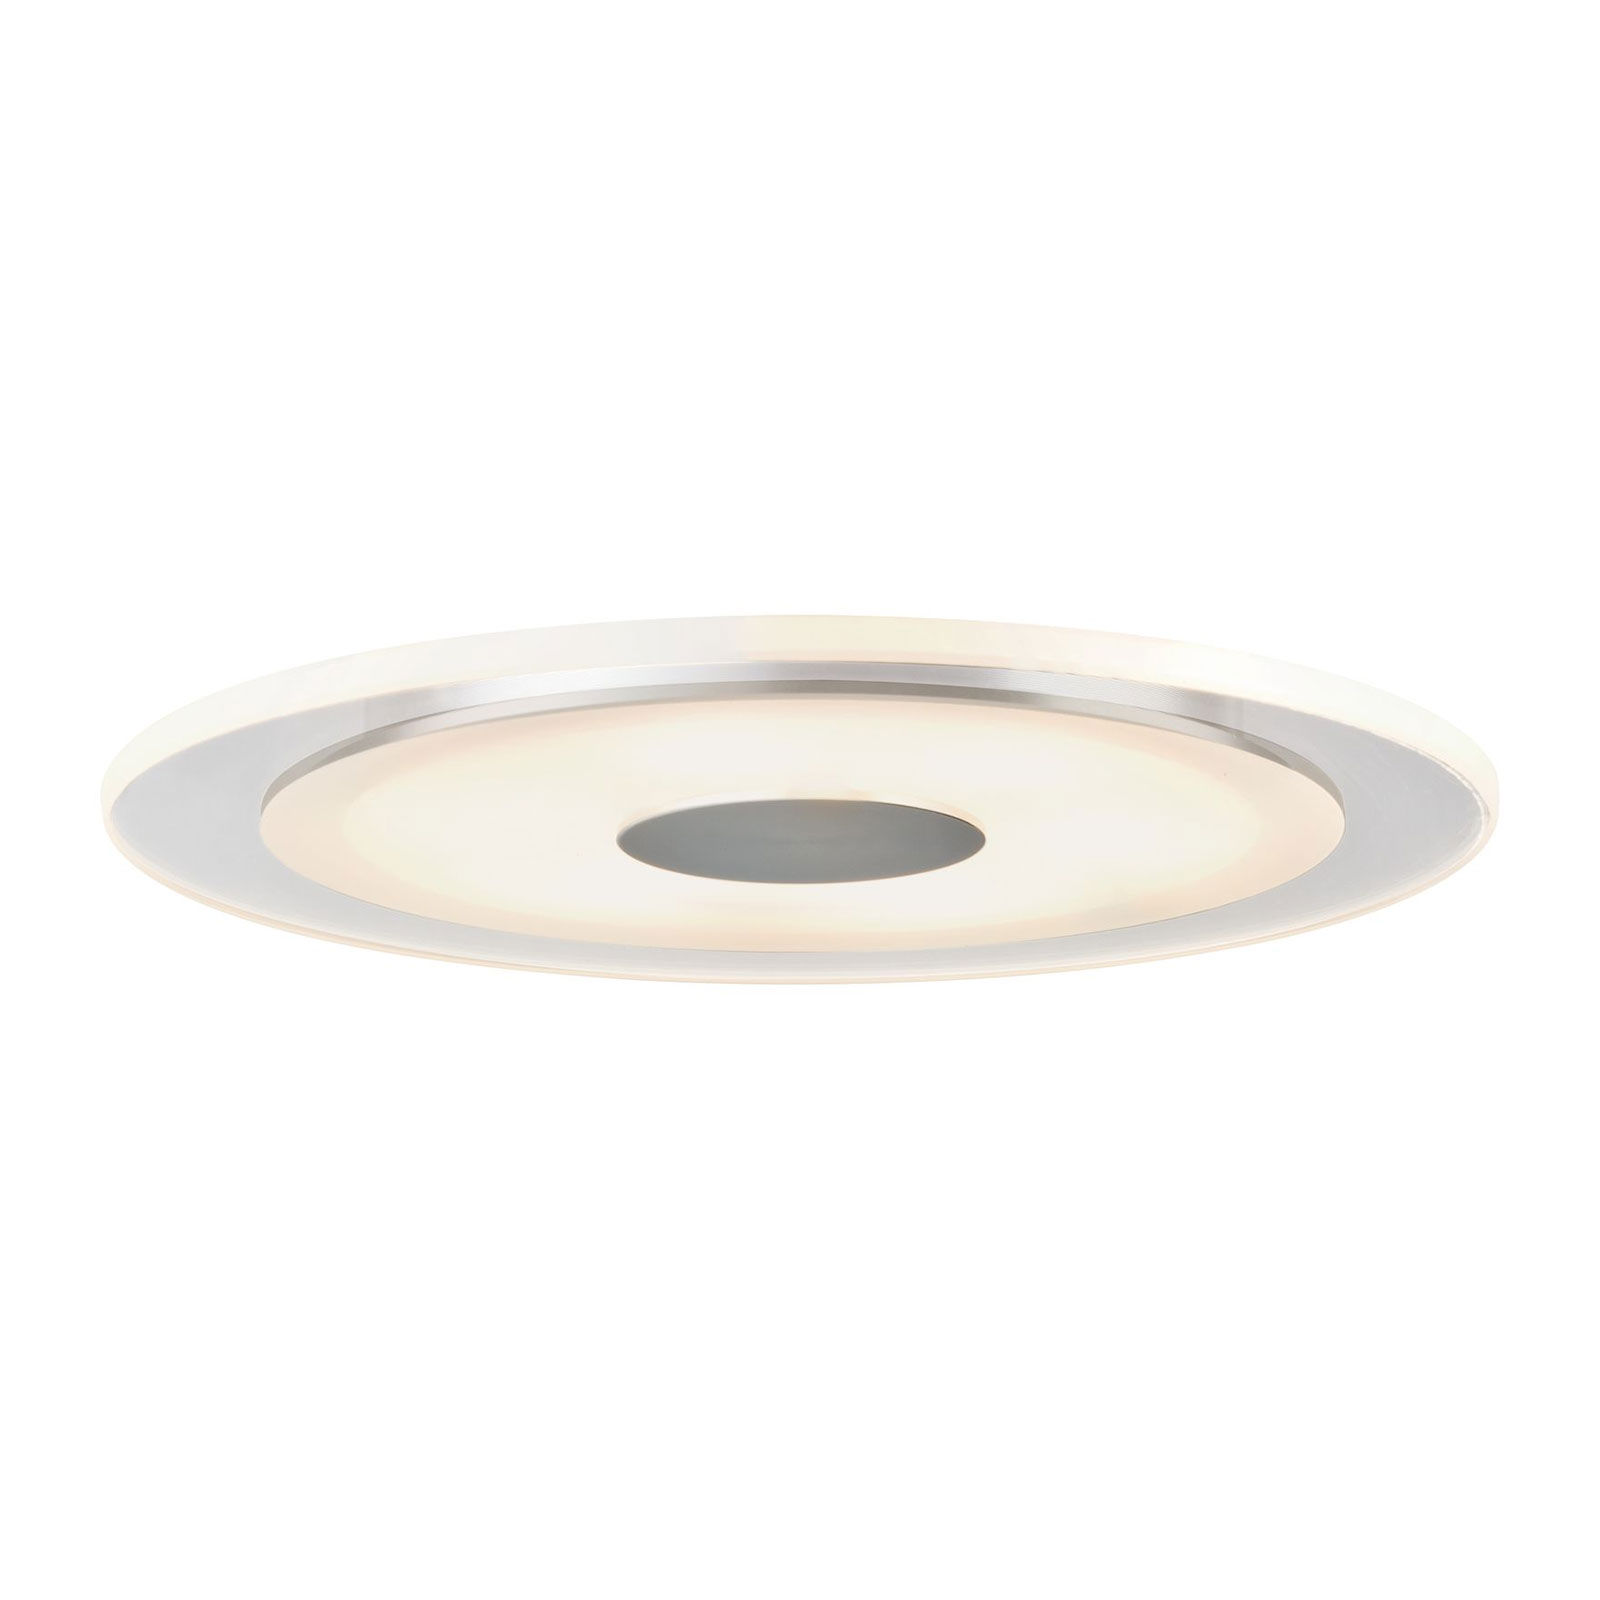 Simple LED recessed light Whirl, 3-piece set